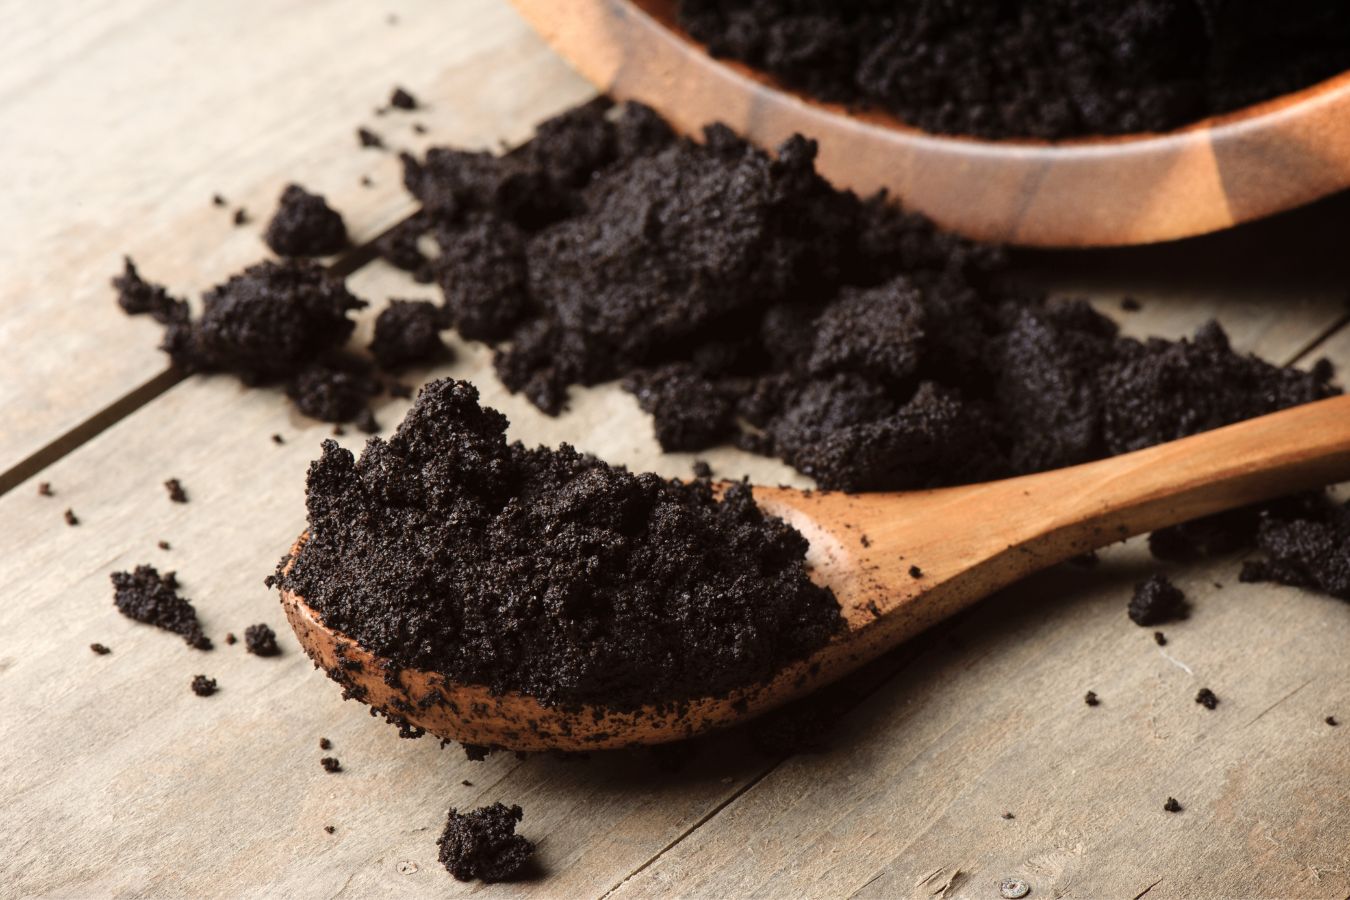 12 Uses of Coffee Grounds